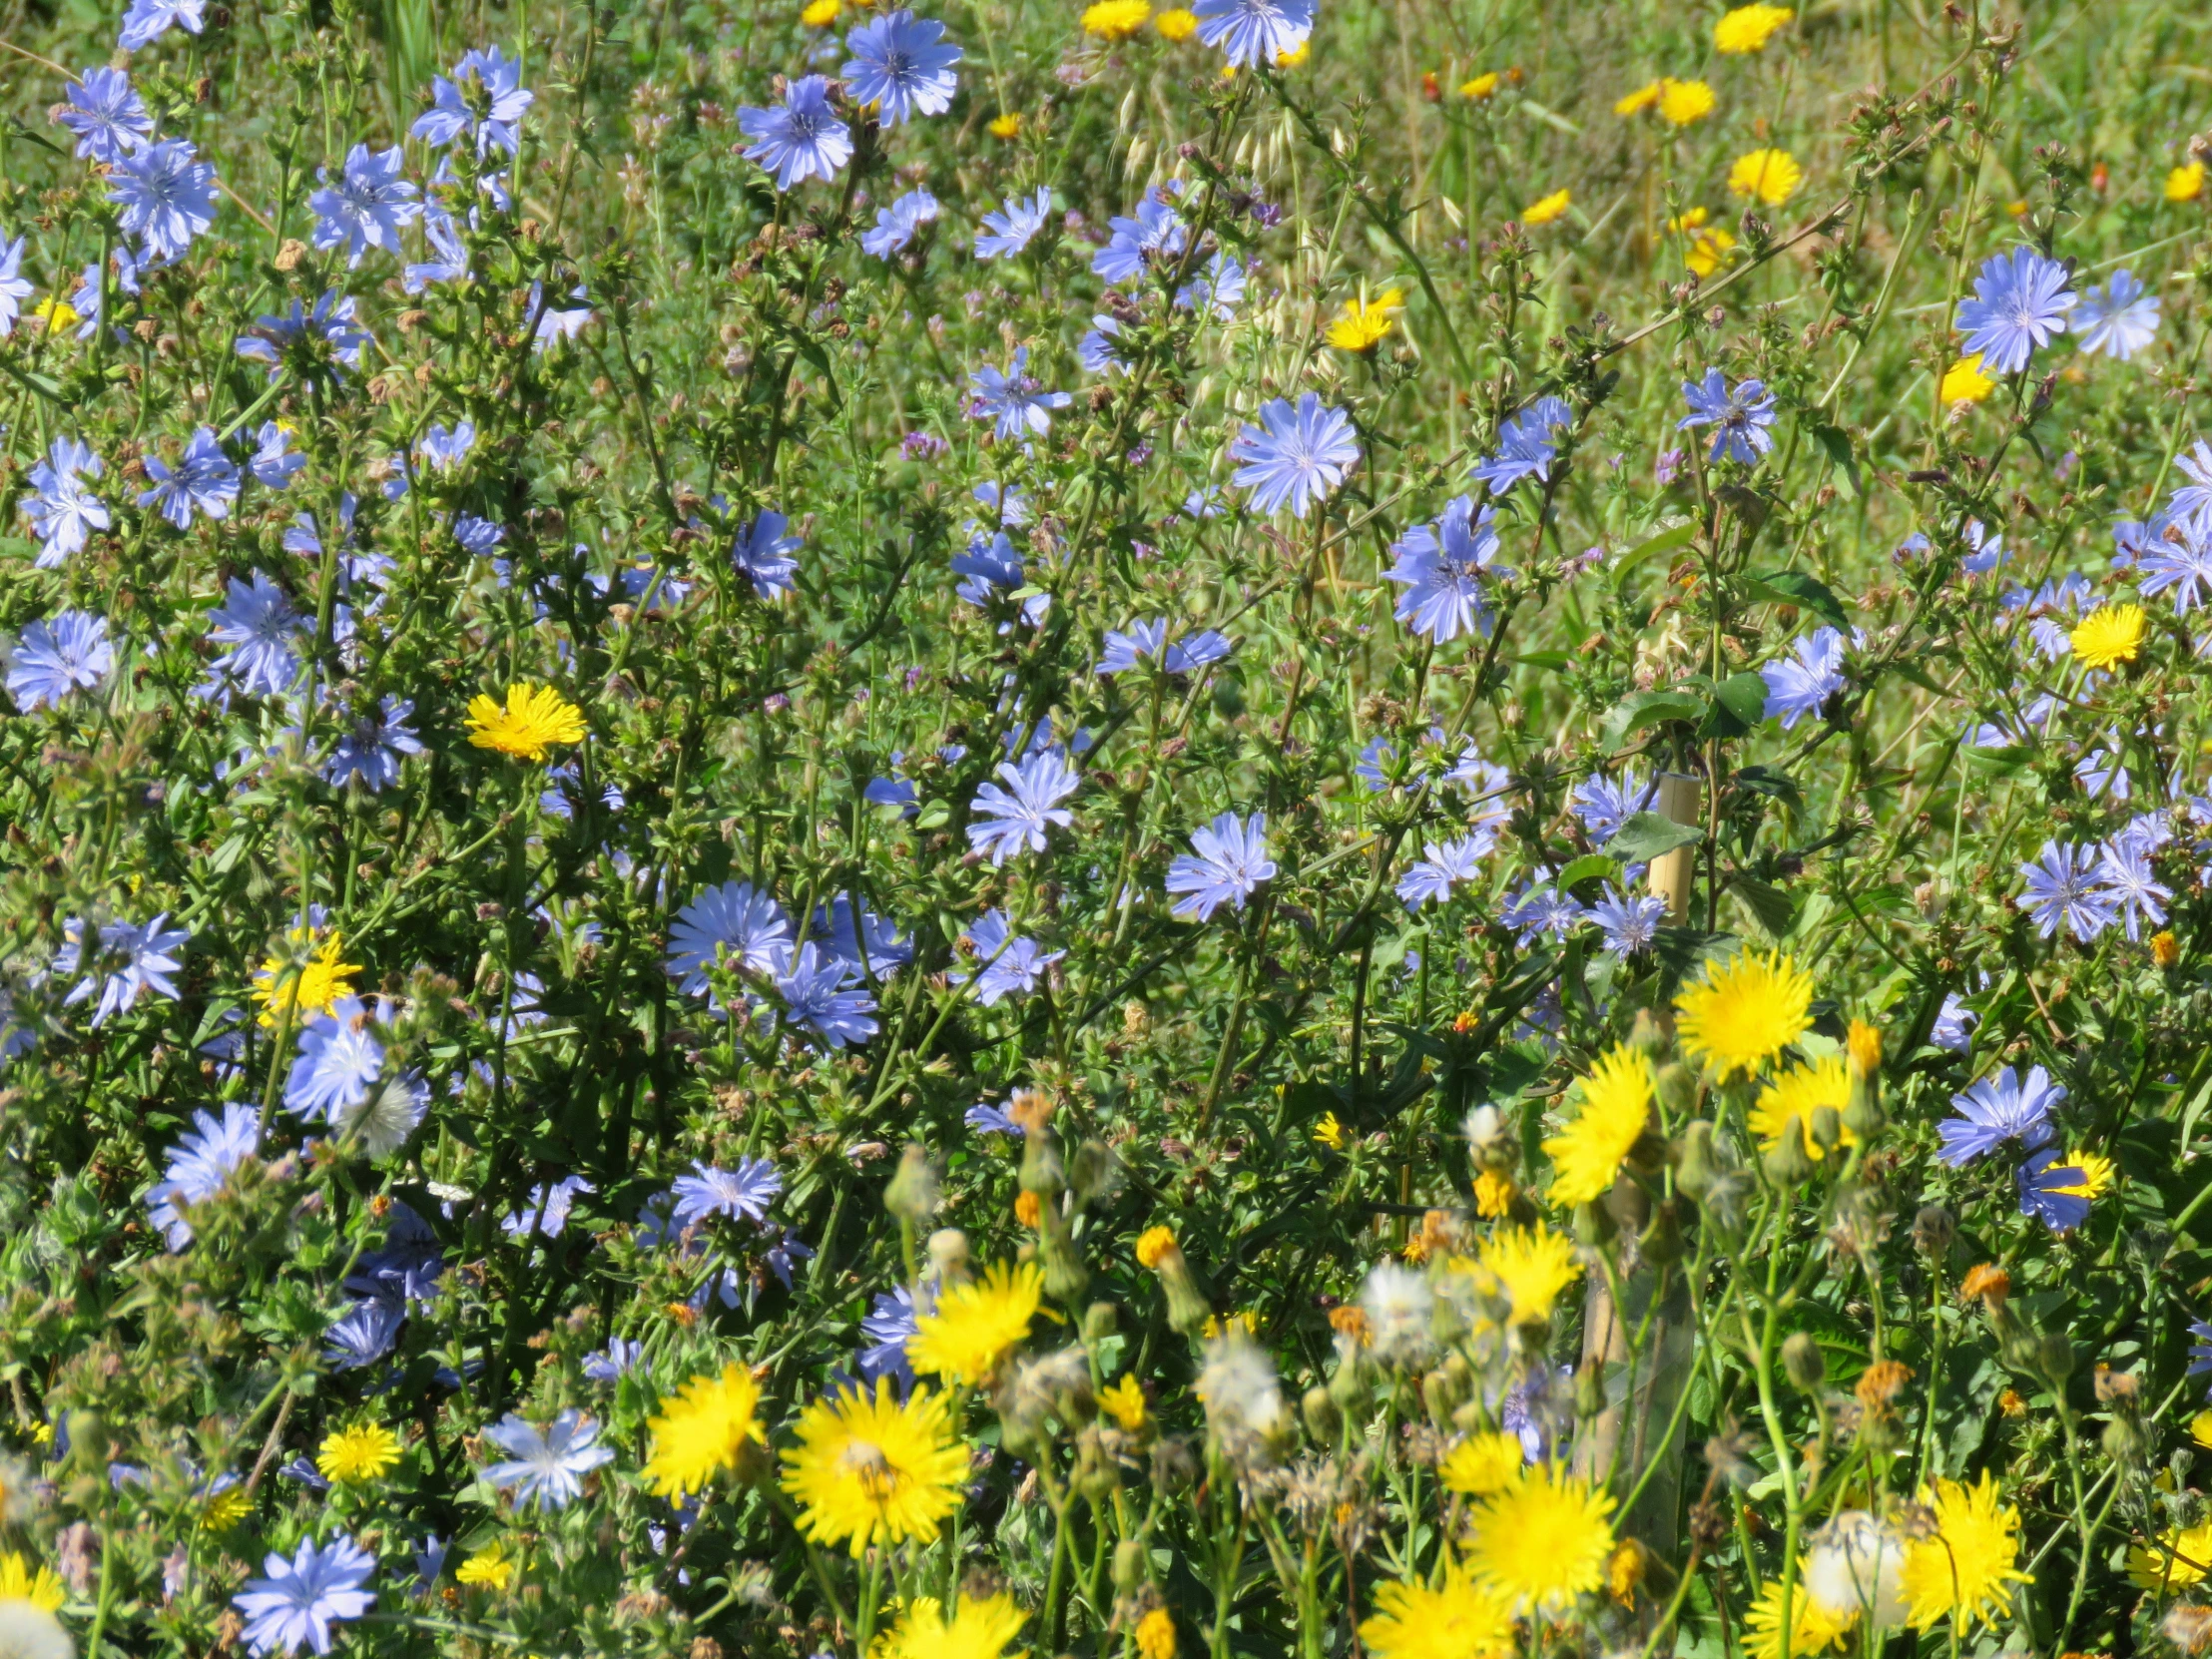 the ground level s of blue and yellow wildflowers in a grassy meadow